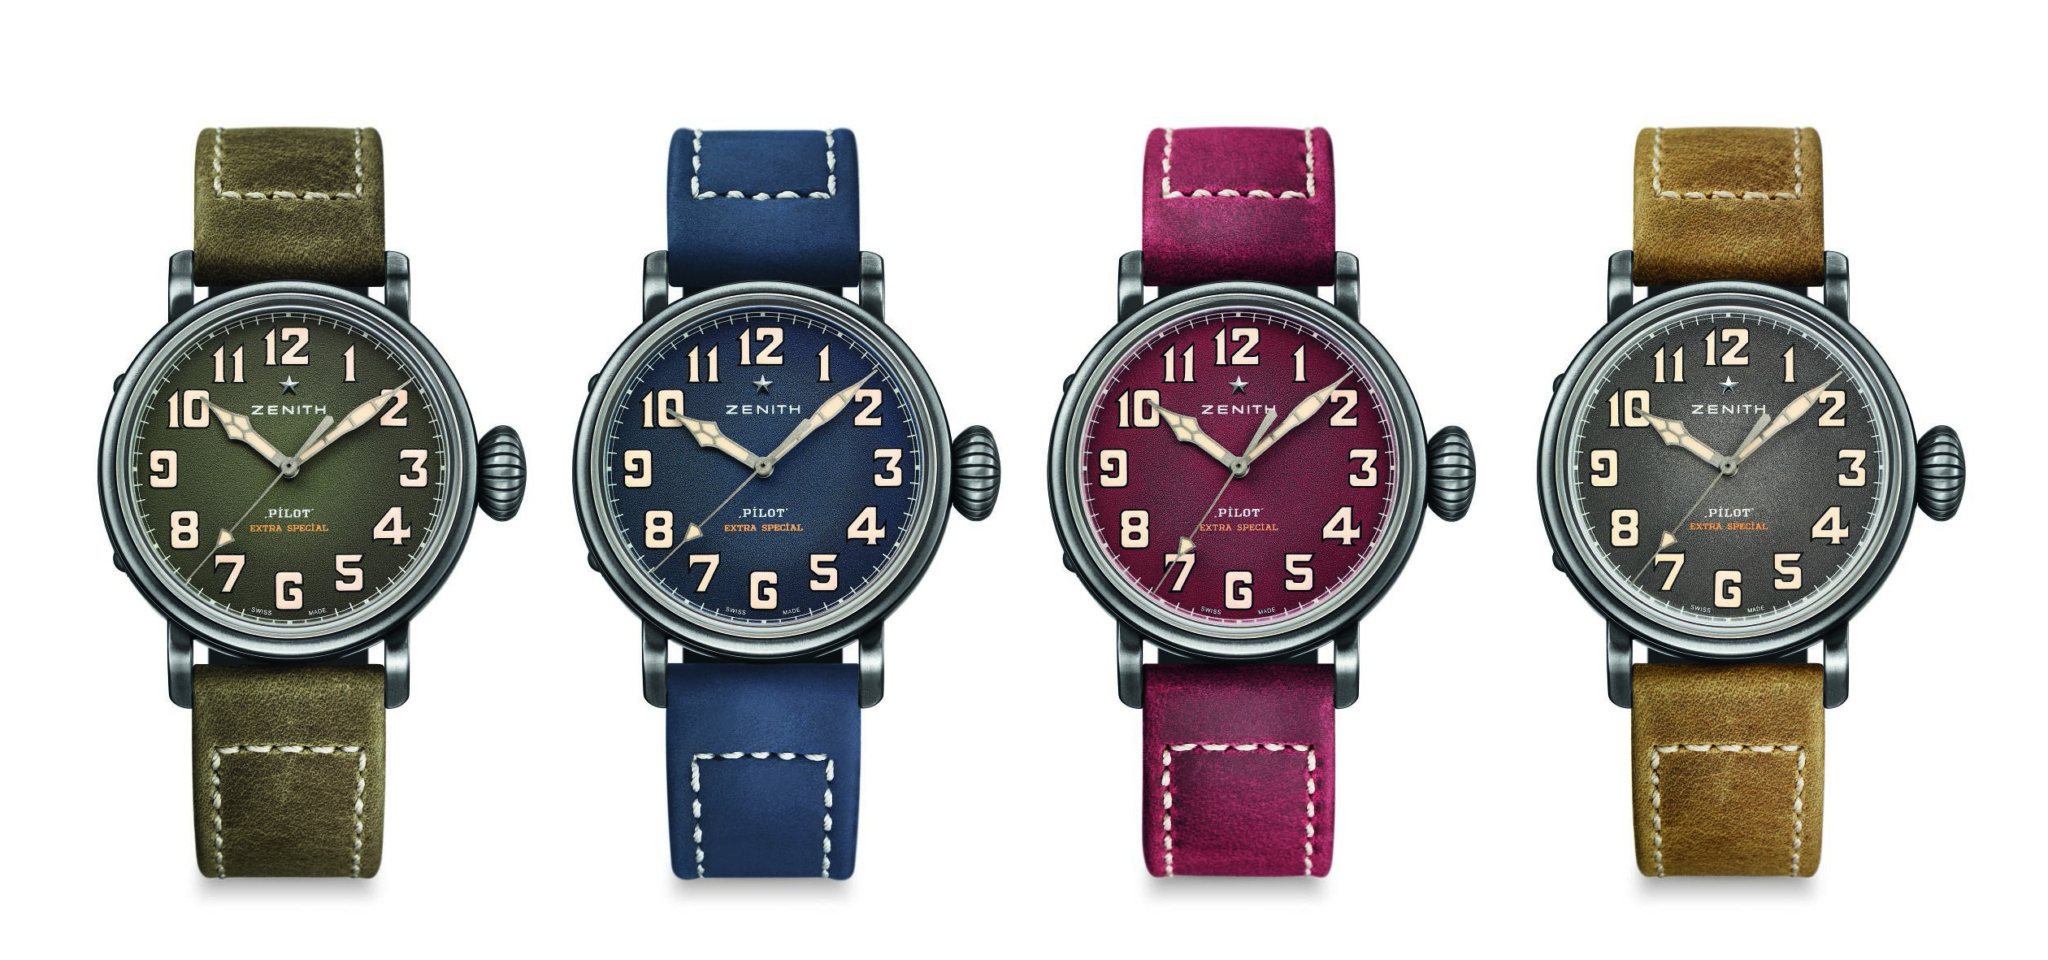 Zenith has created multiple colours of its pilot type 20 this year that will look great on display.